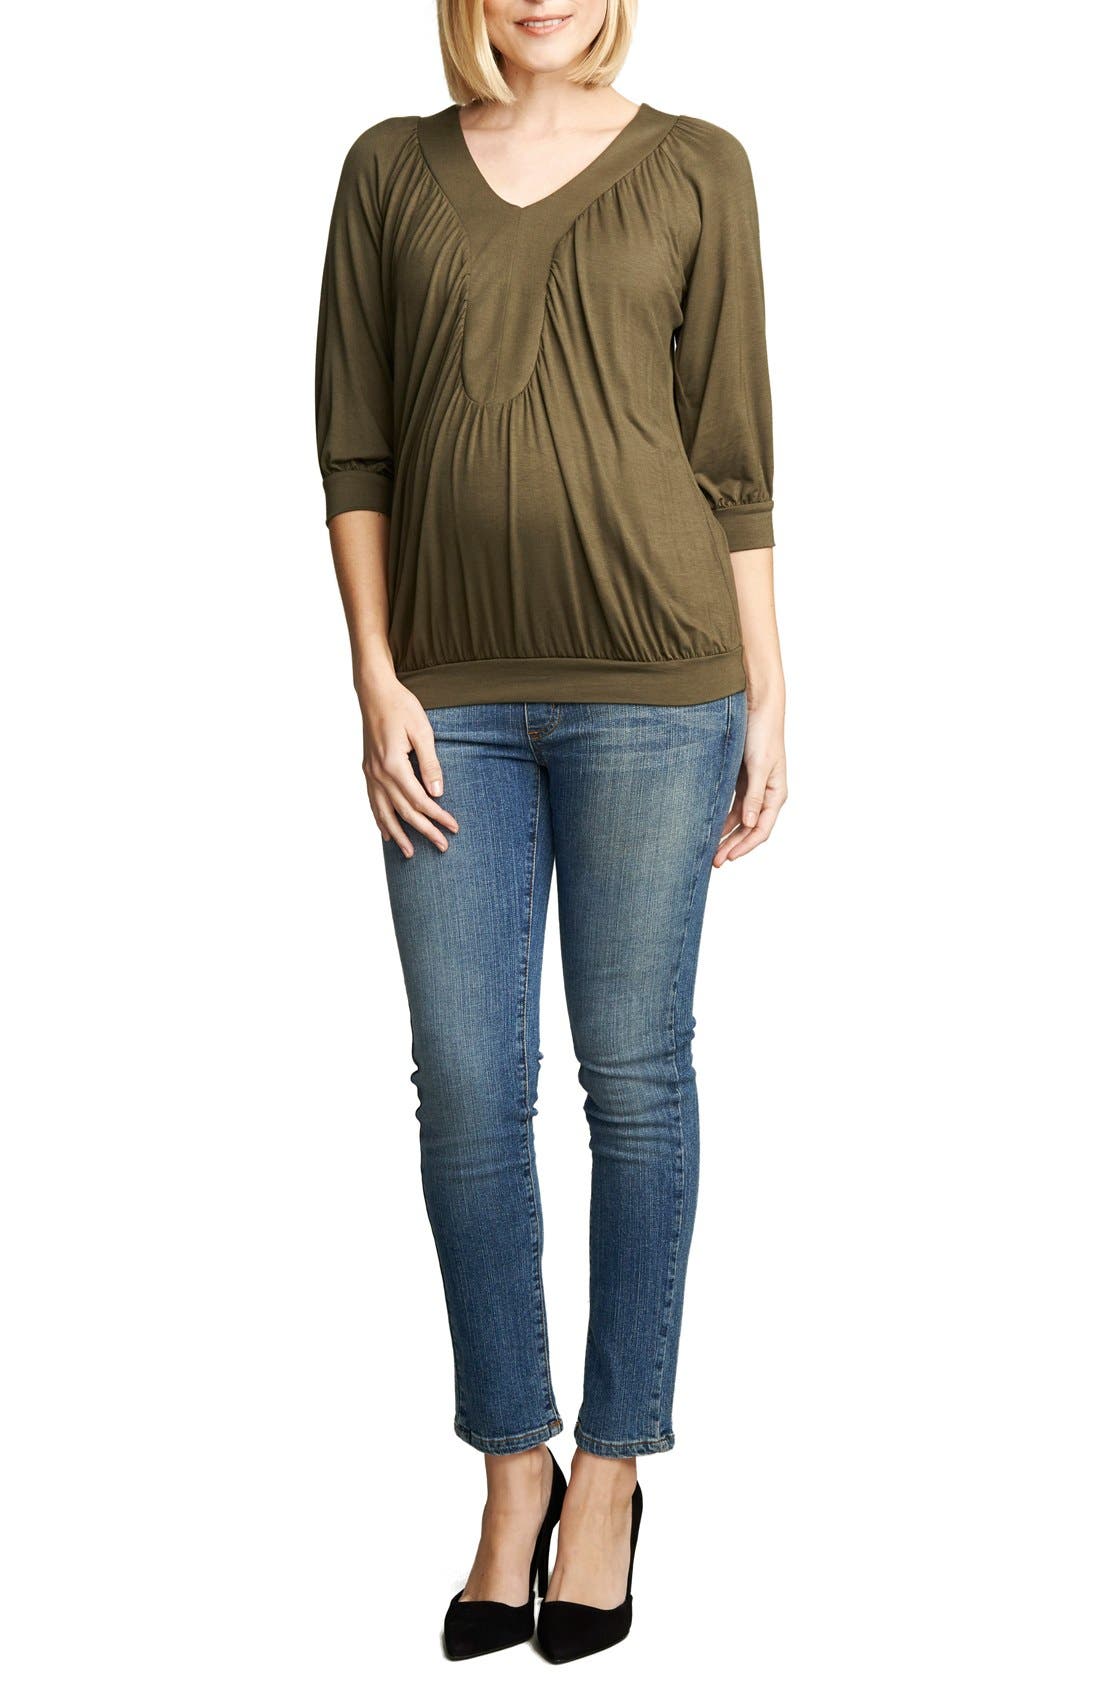 Maternal America Ruched Dolman Top in Olive